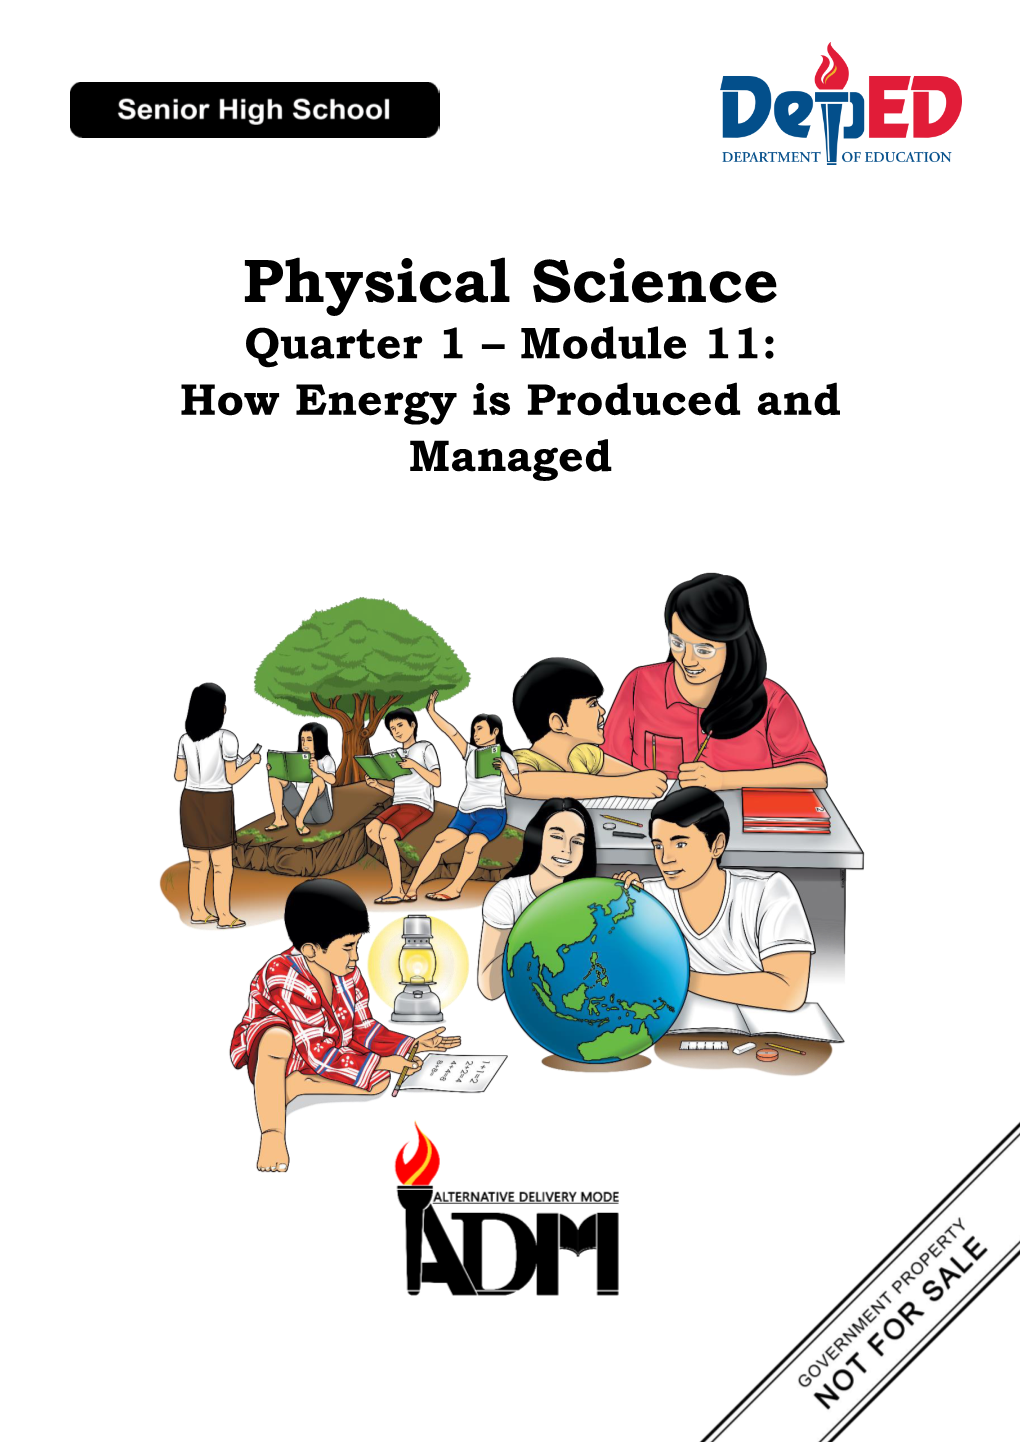 Physical Science Quarter 1 – Module 11: How Energy Is Produced and Managed